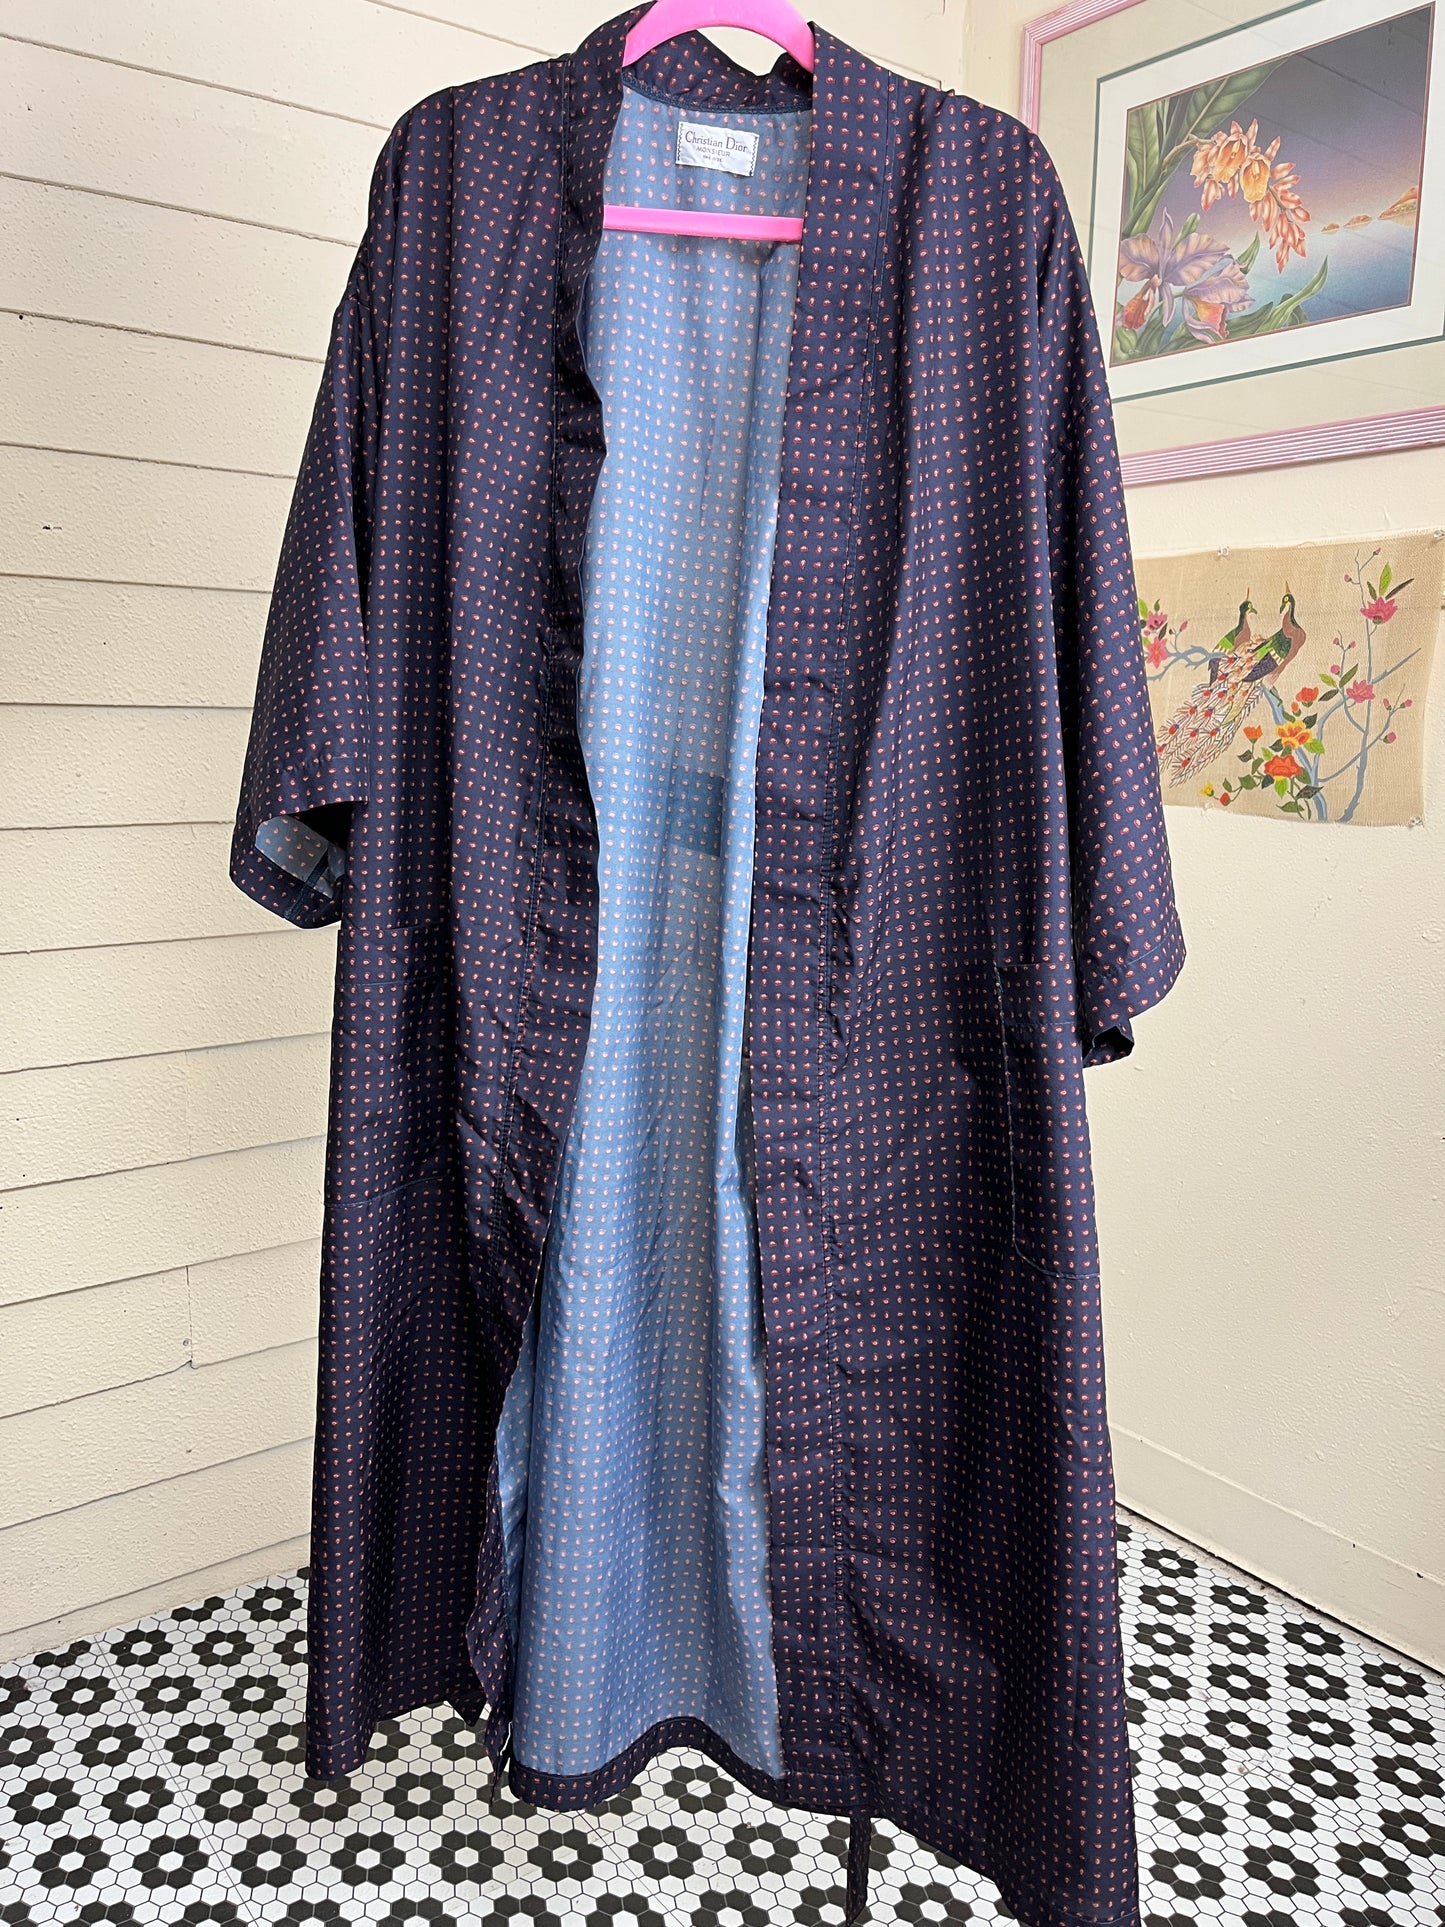 brandnew2ndhand.biz - Vintage Christian Dior Paisley Kimono Robe Smooth,  soft & sexy, this robe is ready for it aLL. Easy on the eyes with a classic  Paisley pattern, 2 pockets, kimono-style sleeves